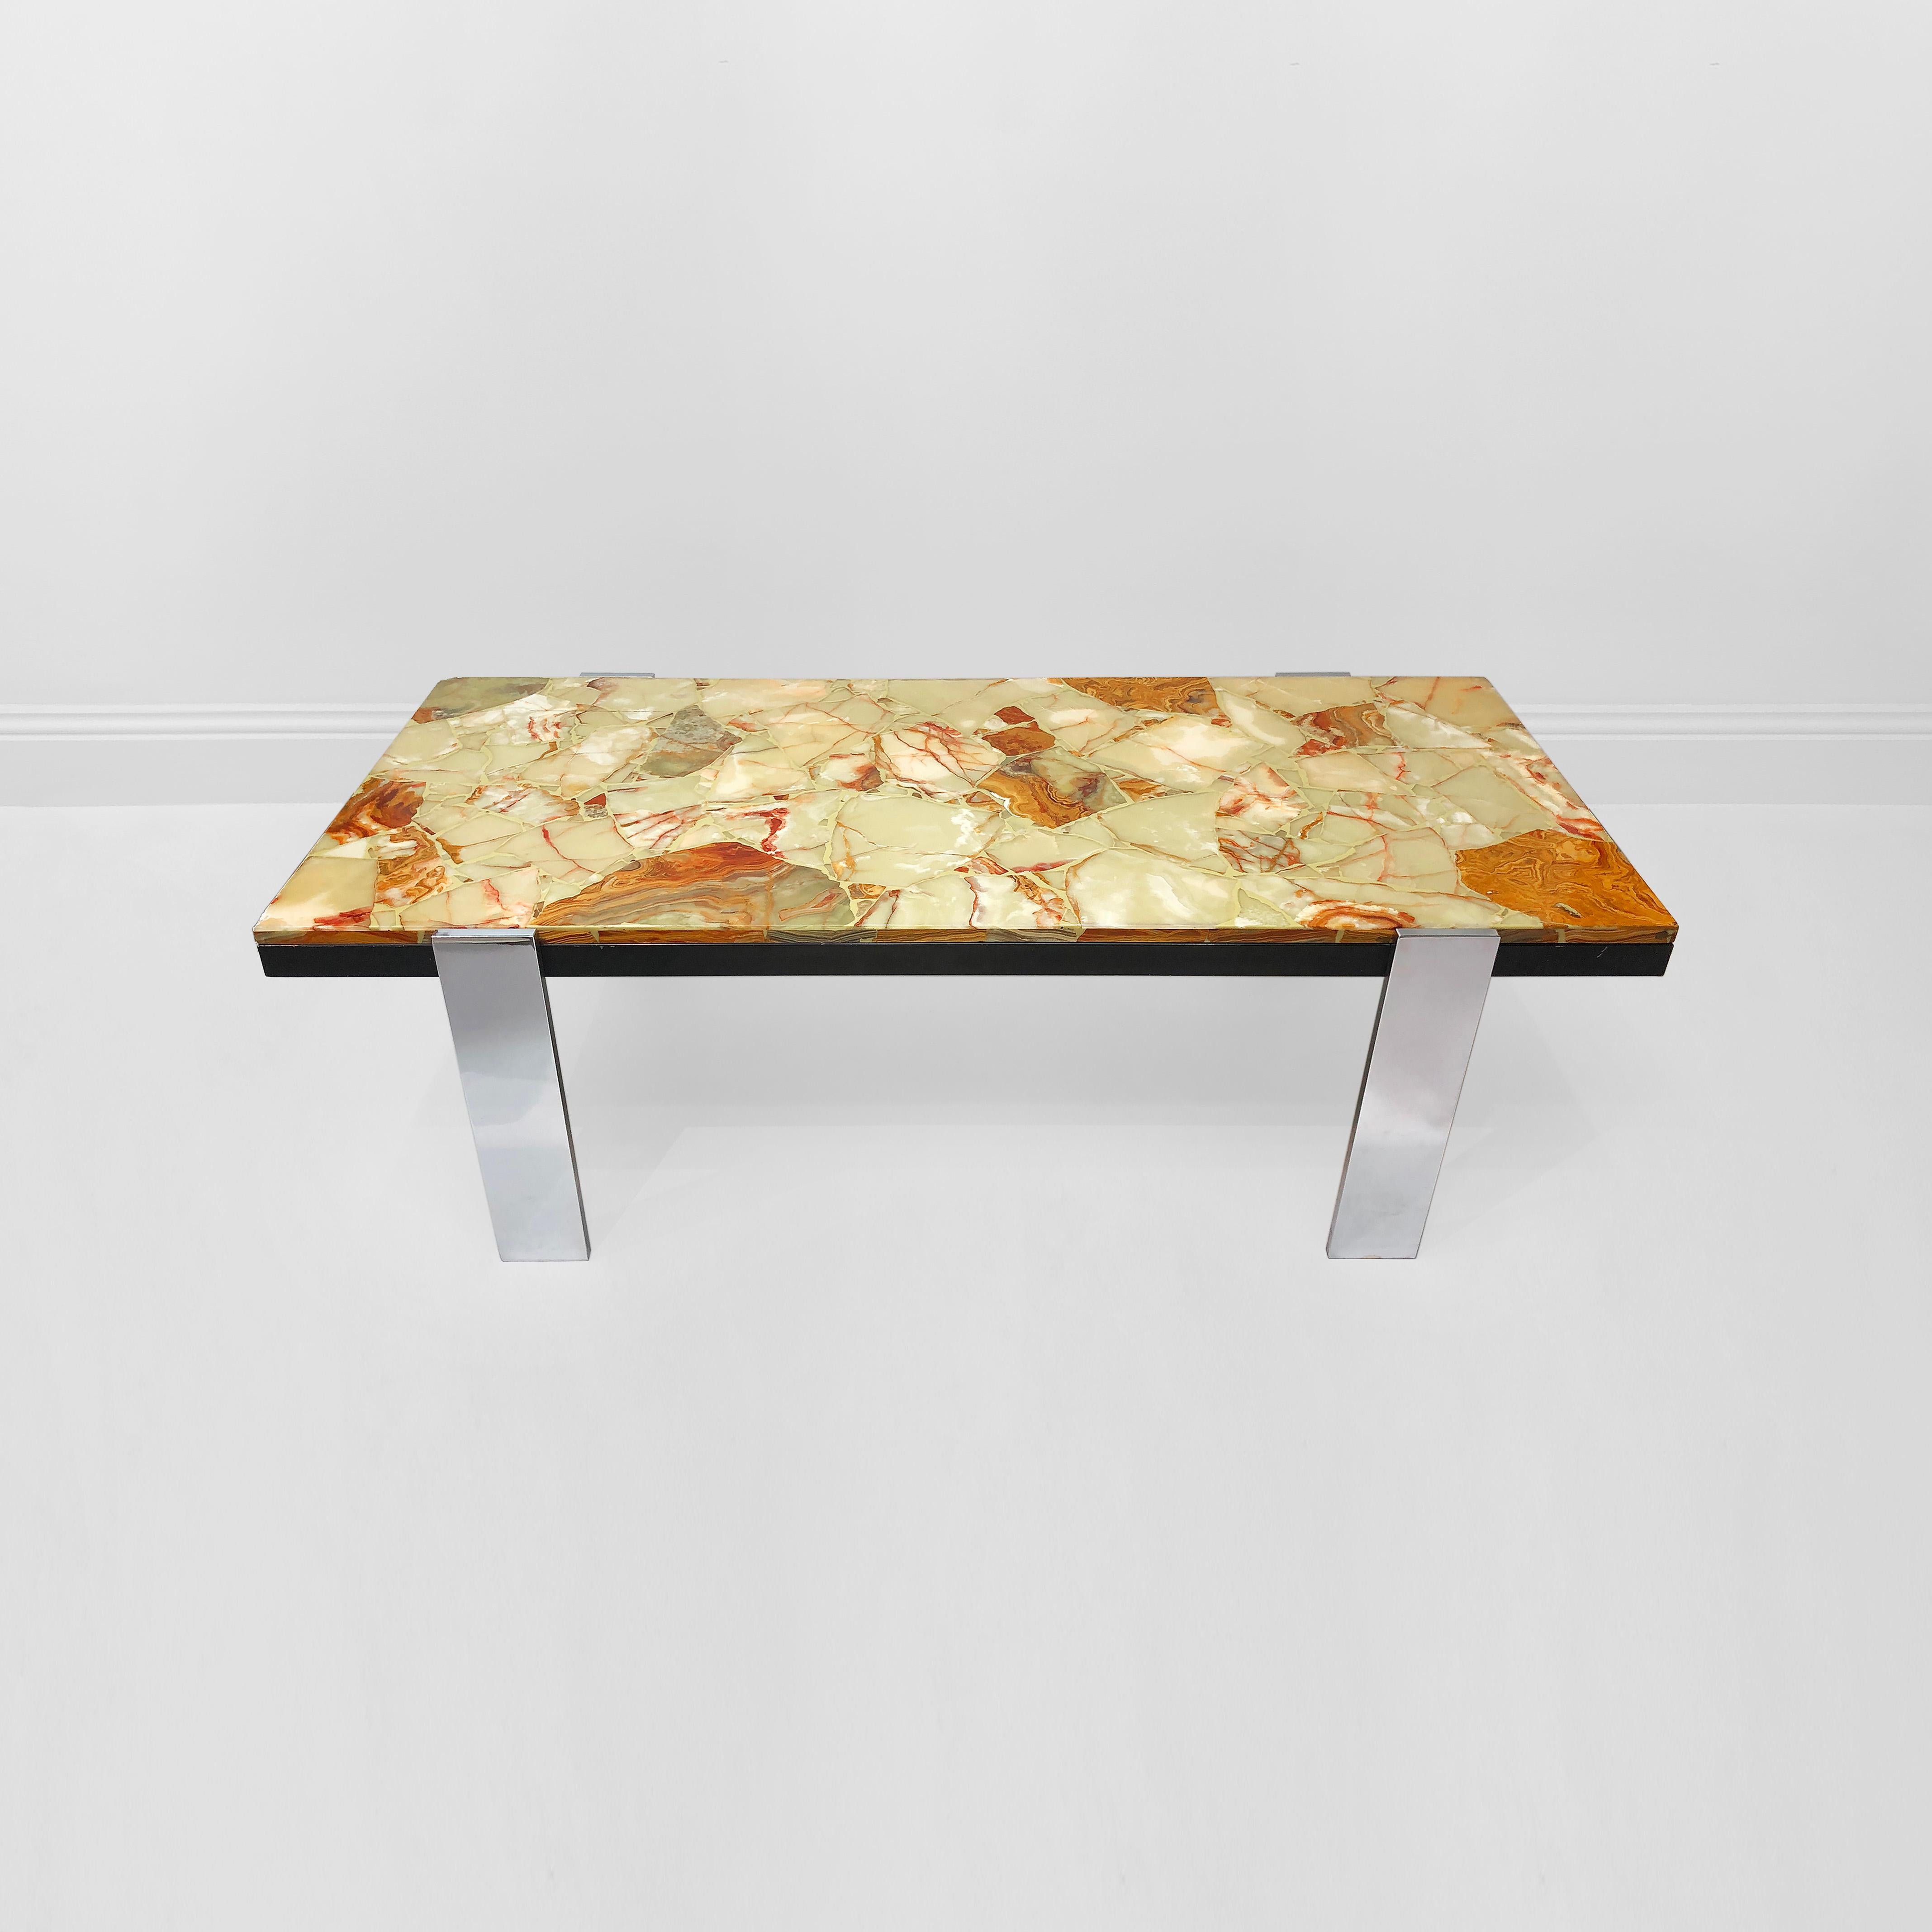 Late 20th Century Italian Marble Mosaic and Steel Coffee Table Hollywood Regency 1970s Midcentury